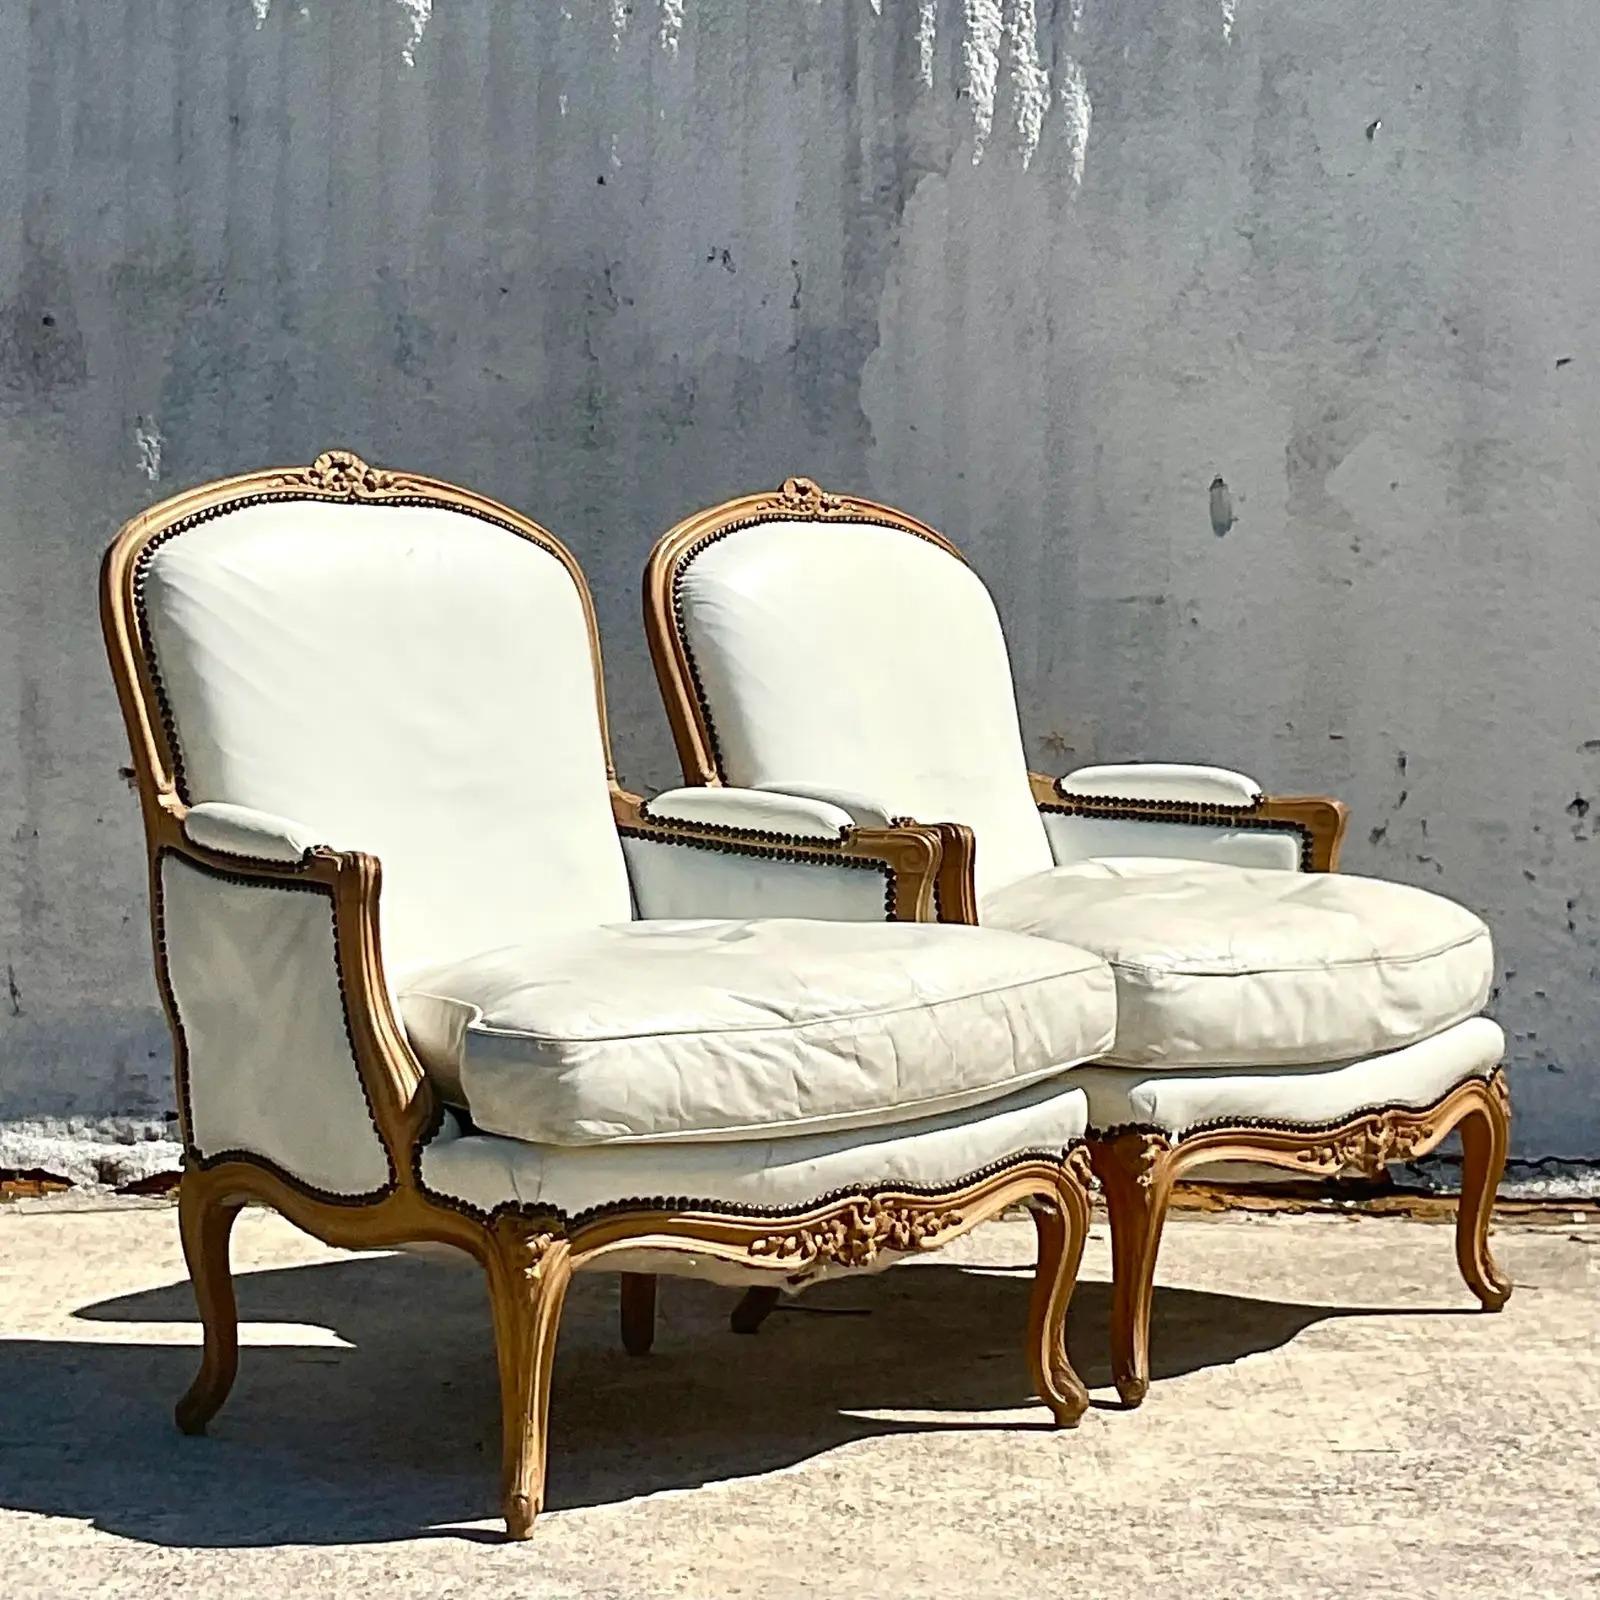 Vintage Boho John Dickinson White Leather Bergere Chairs - a Pair For Sale 5